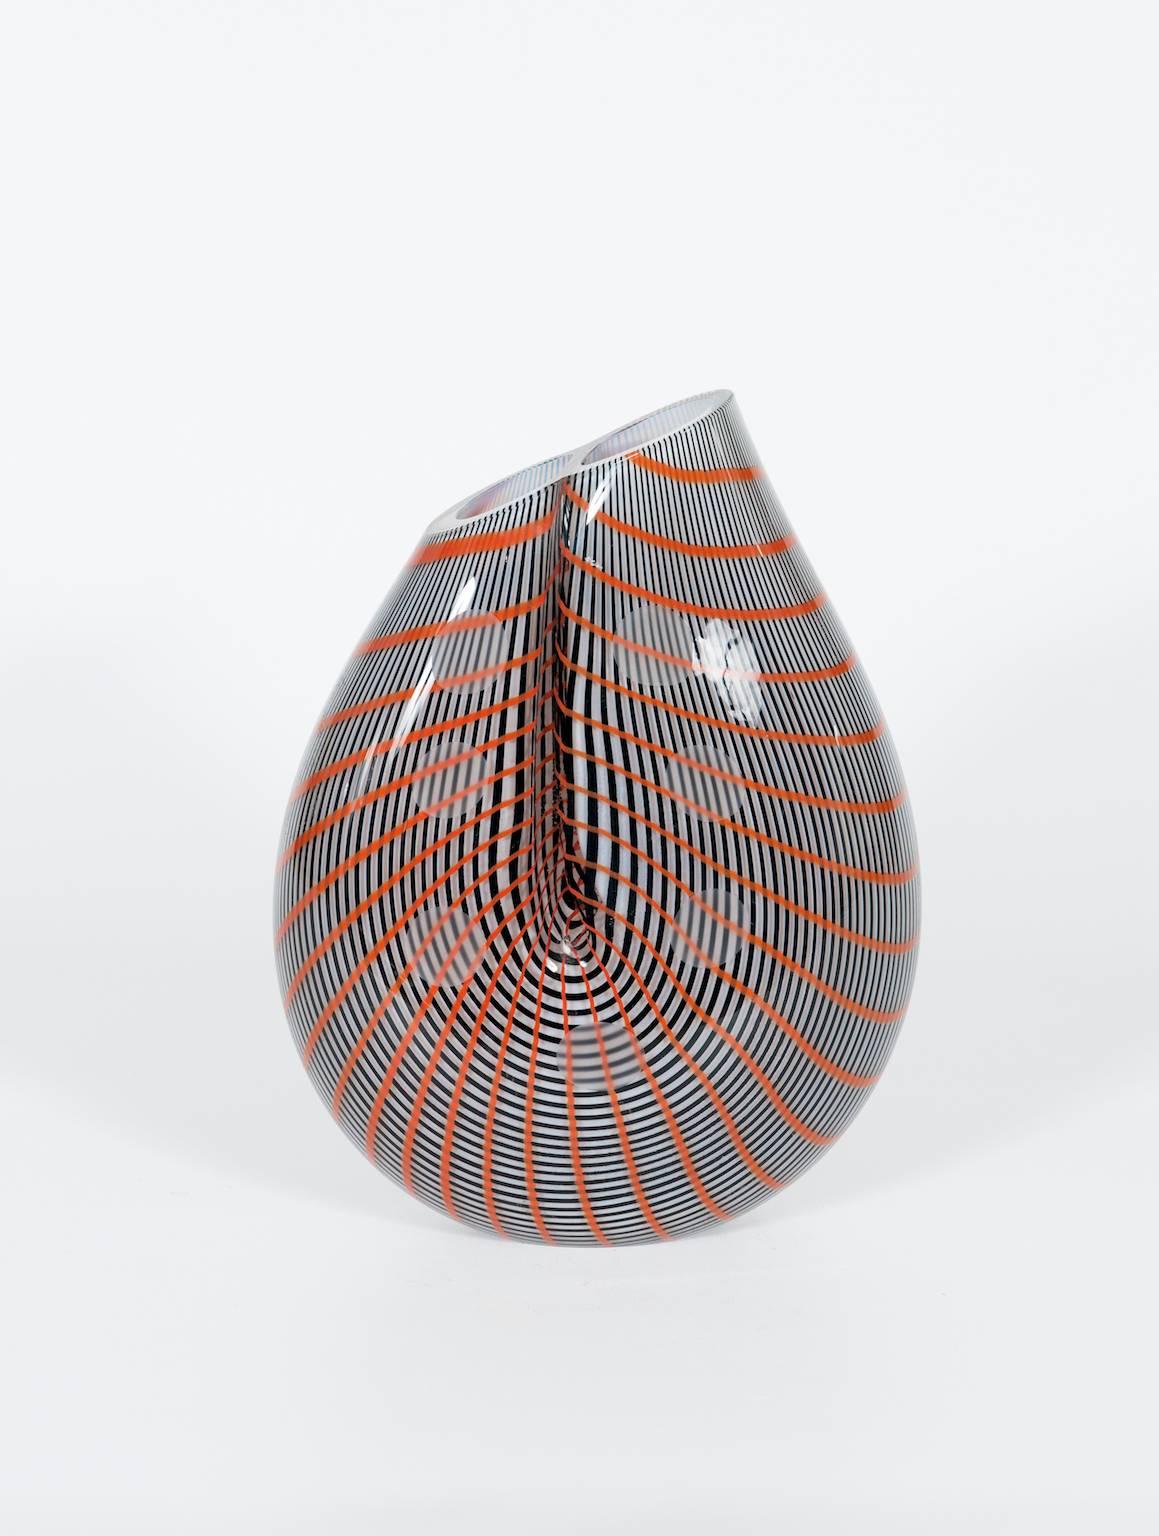 Elegant, and Modern, Italian Venetian, Vase, blown Murano Glass, exclusive shape, with stripes, 1990s. 
This is a unique portrait, entirely handcrafted in Blown Murano Glass in the Italian, Venetian Island of Murano, by the most experienced Murano